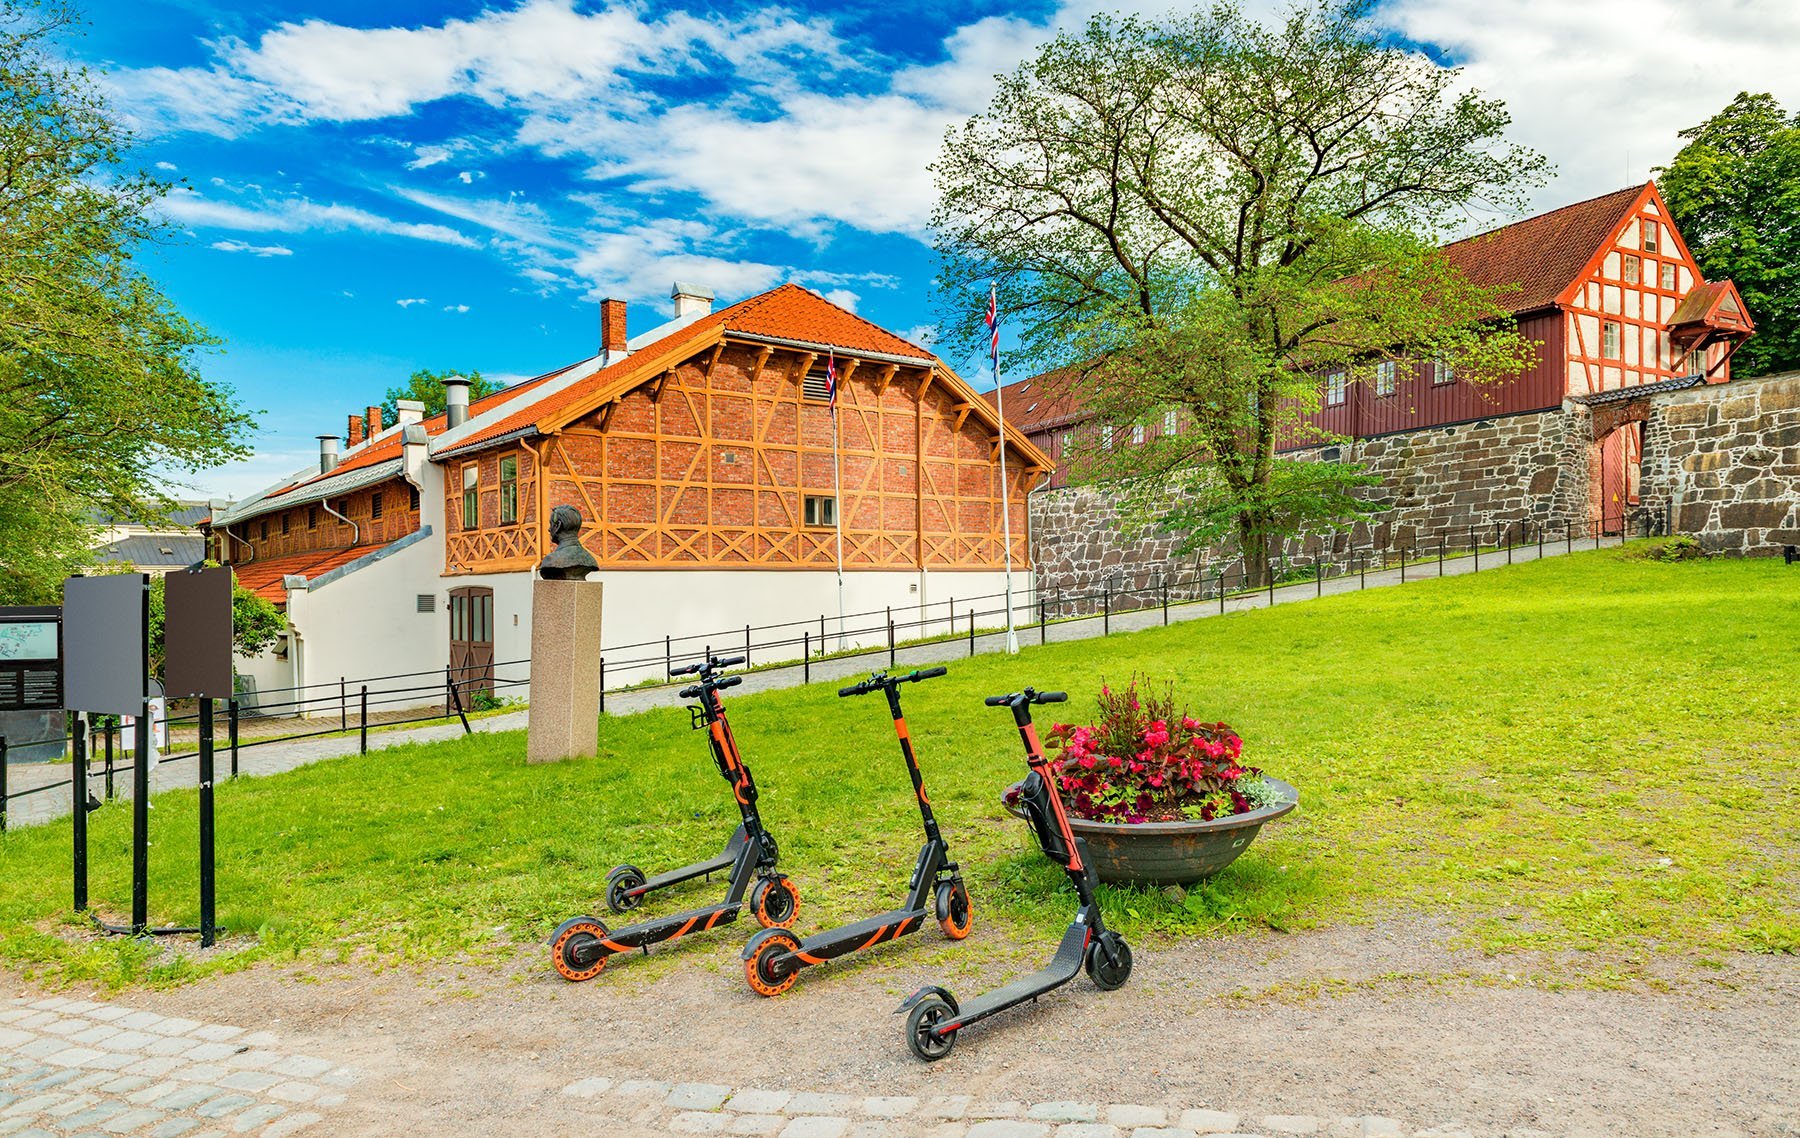 Electric scooters in Oslo, Norway